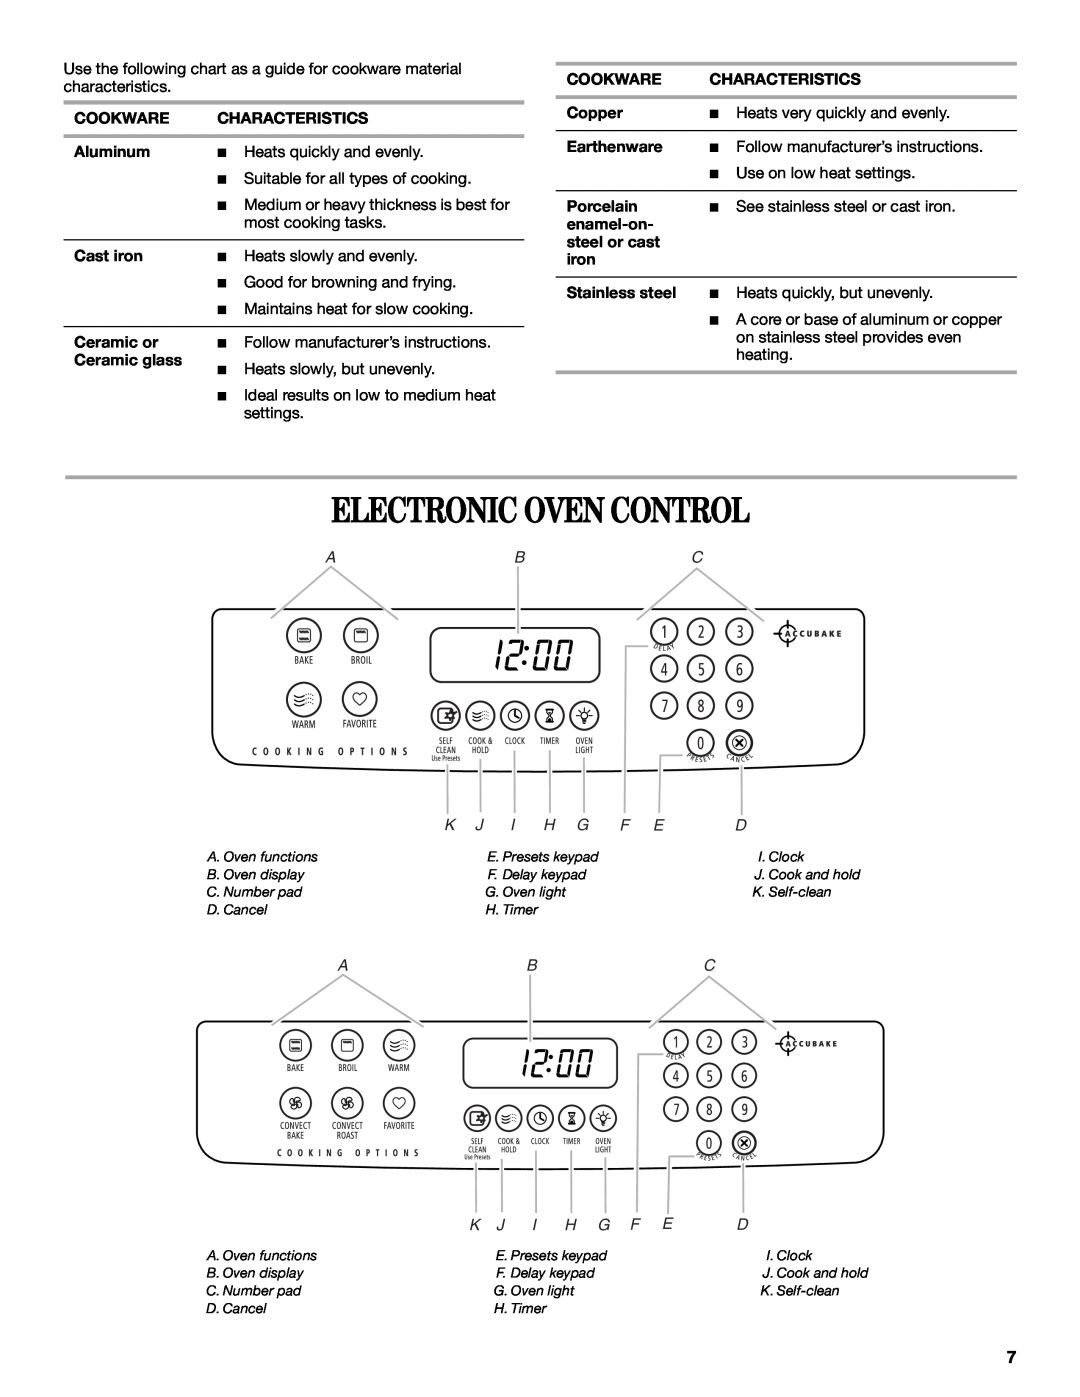 Whirlpool GY397LXUS manual Electronic Oven Control, H G F E 